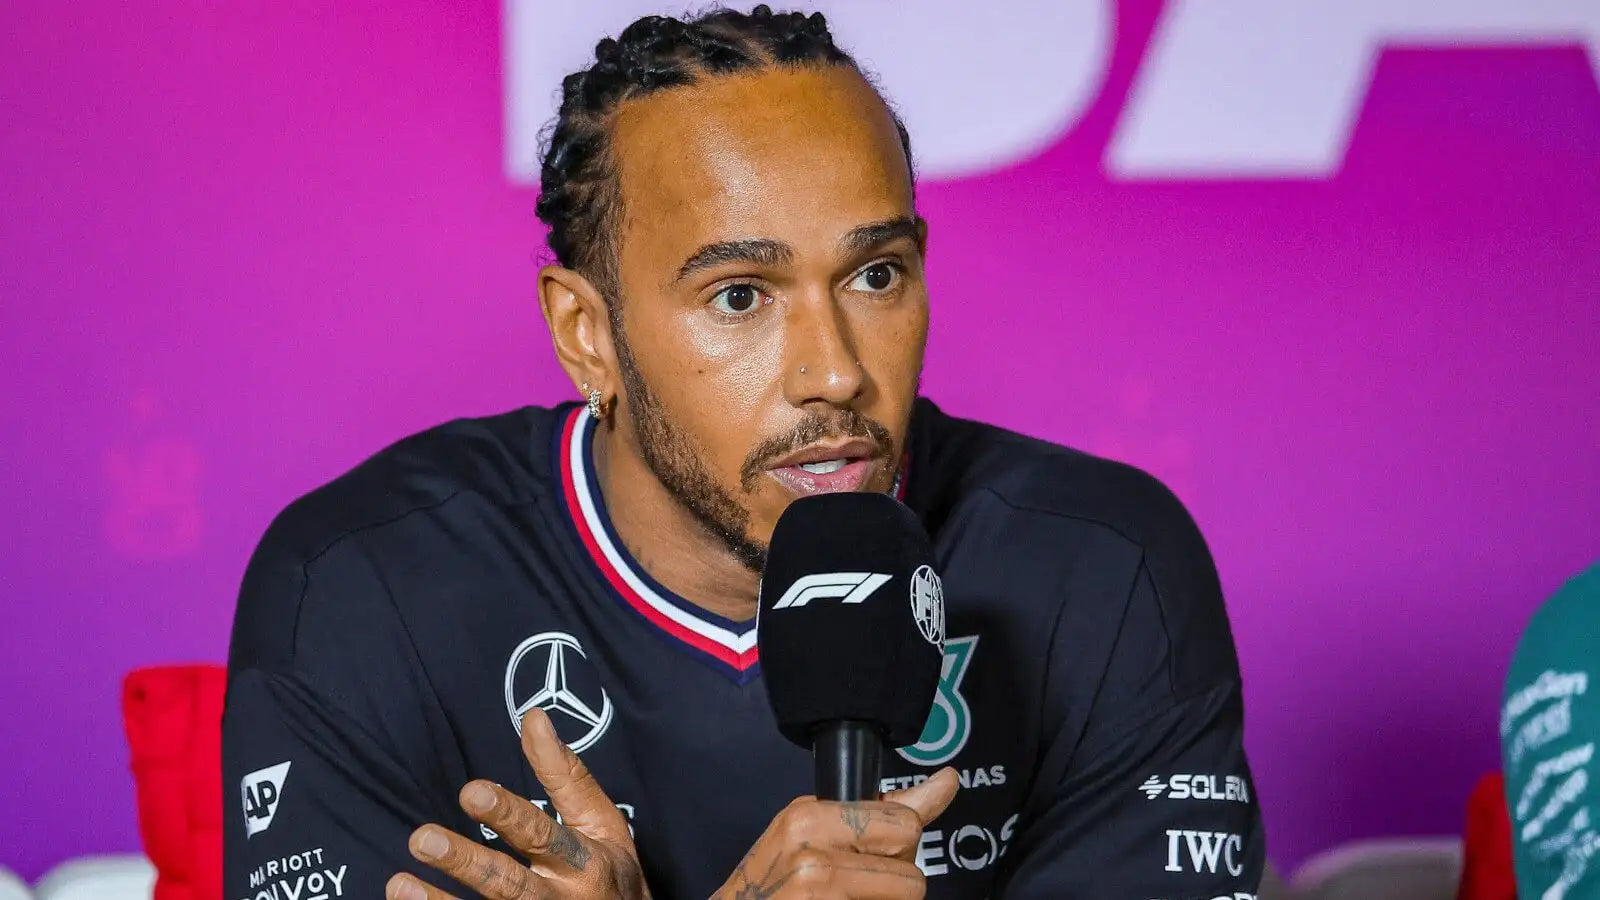 Lewis Hamilton reveals timeline when ‘everything kind of turned upside down’